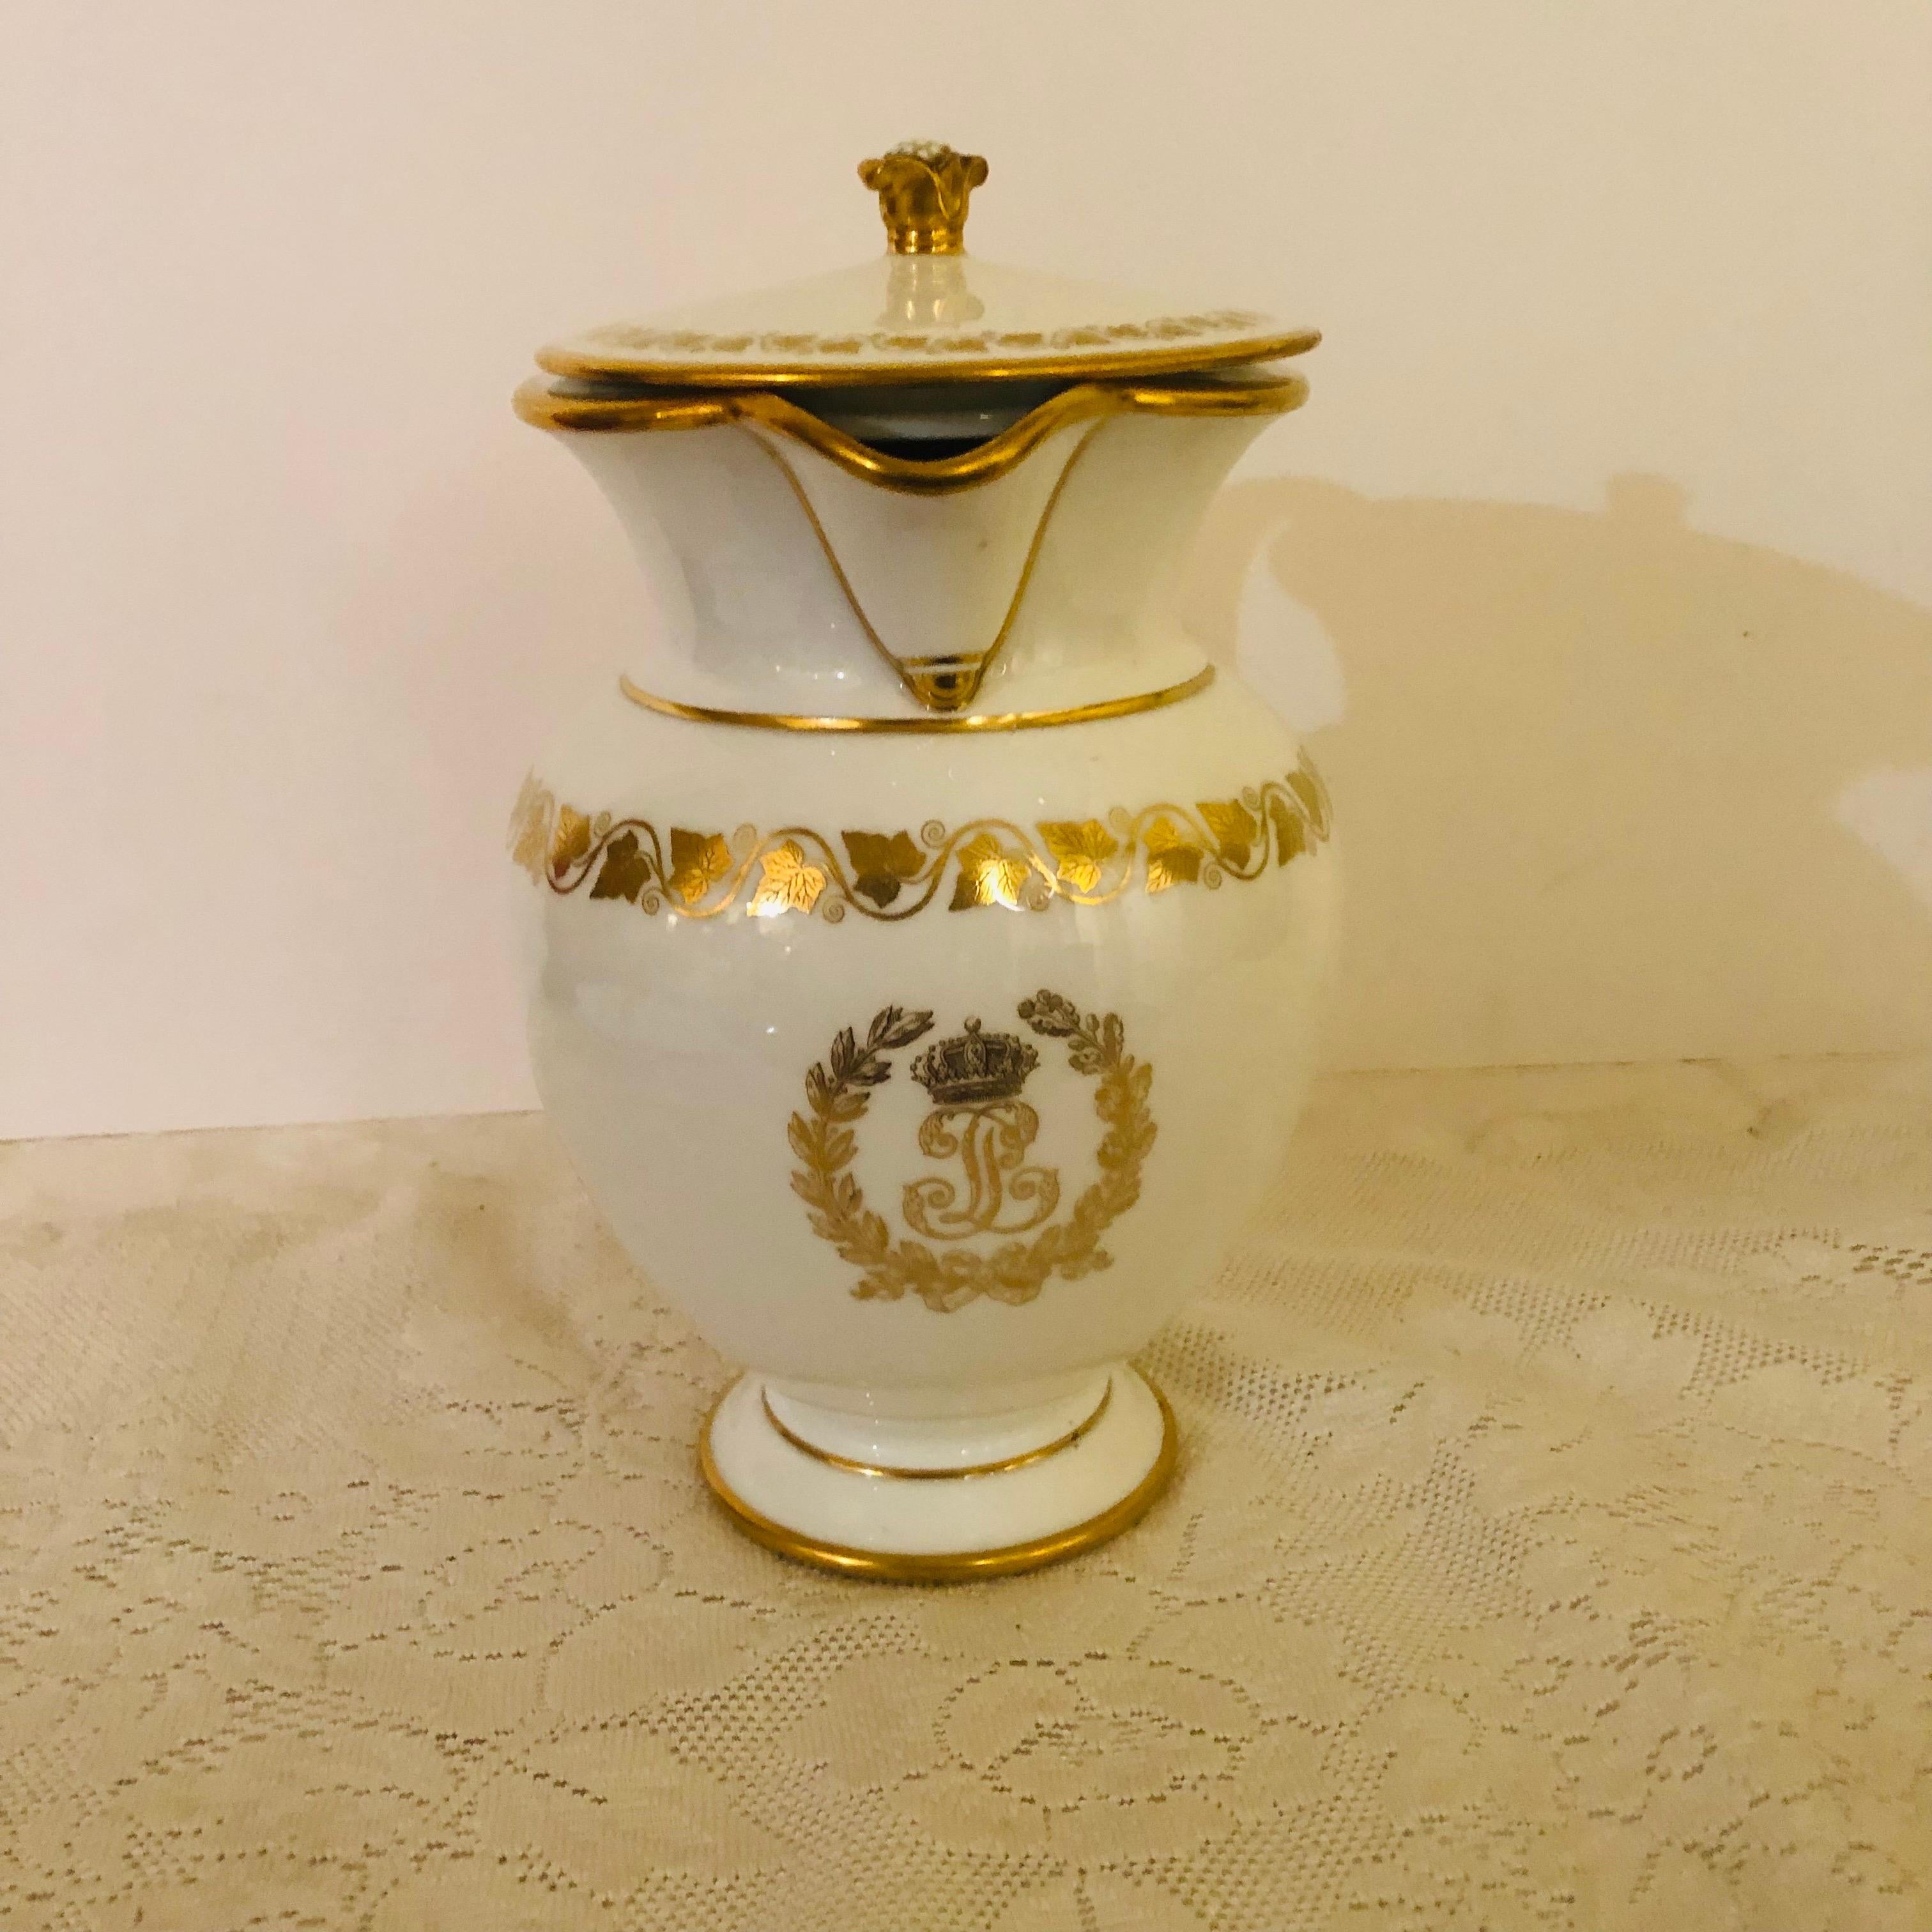 This is a fabulous, rare Sevres covered pitcher with white ground that has an elegant central gold monogram for King Louis Philippe made for his Chateau de Trianon. The gold monogram LP is surrounded by a gold foliate leaf wreath. Above the monogram